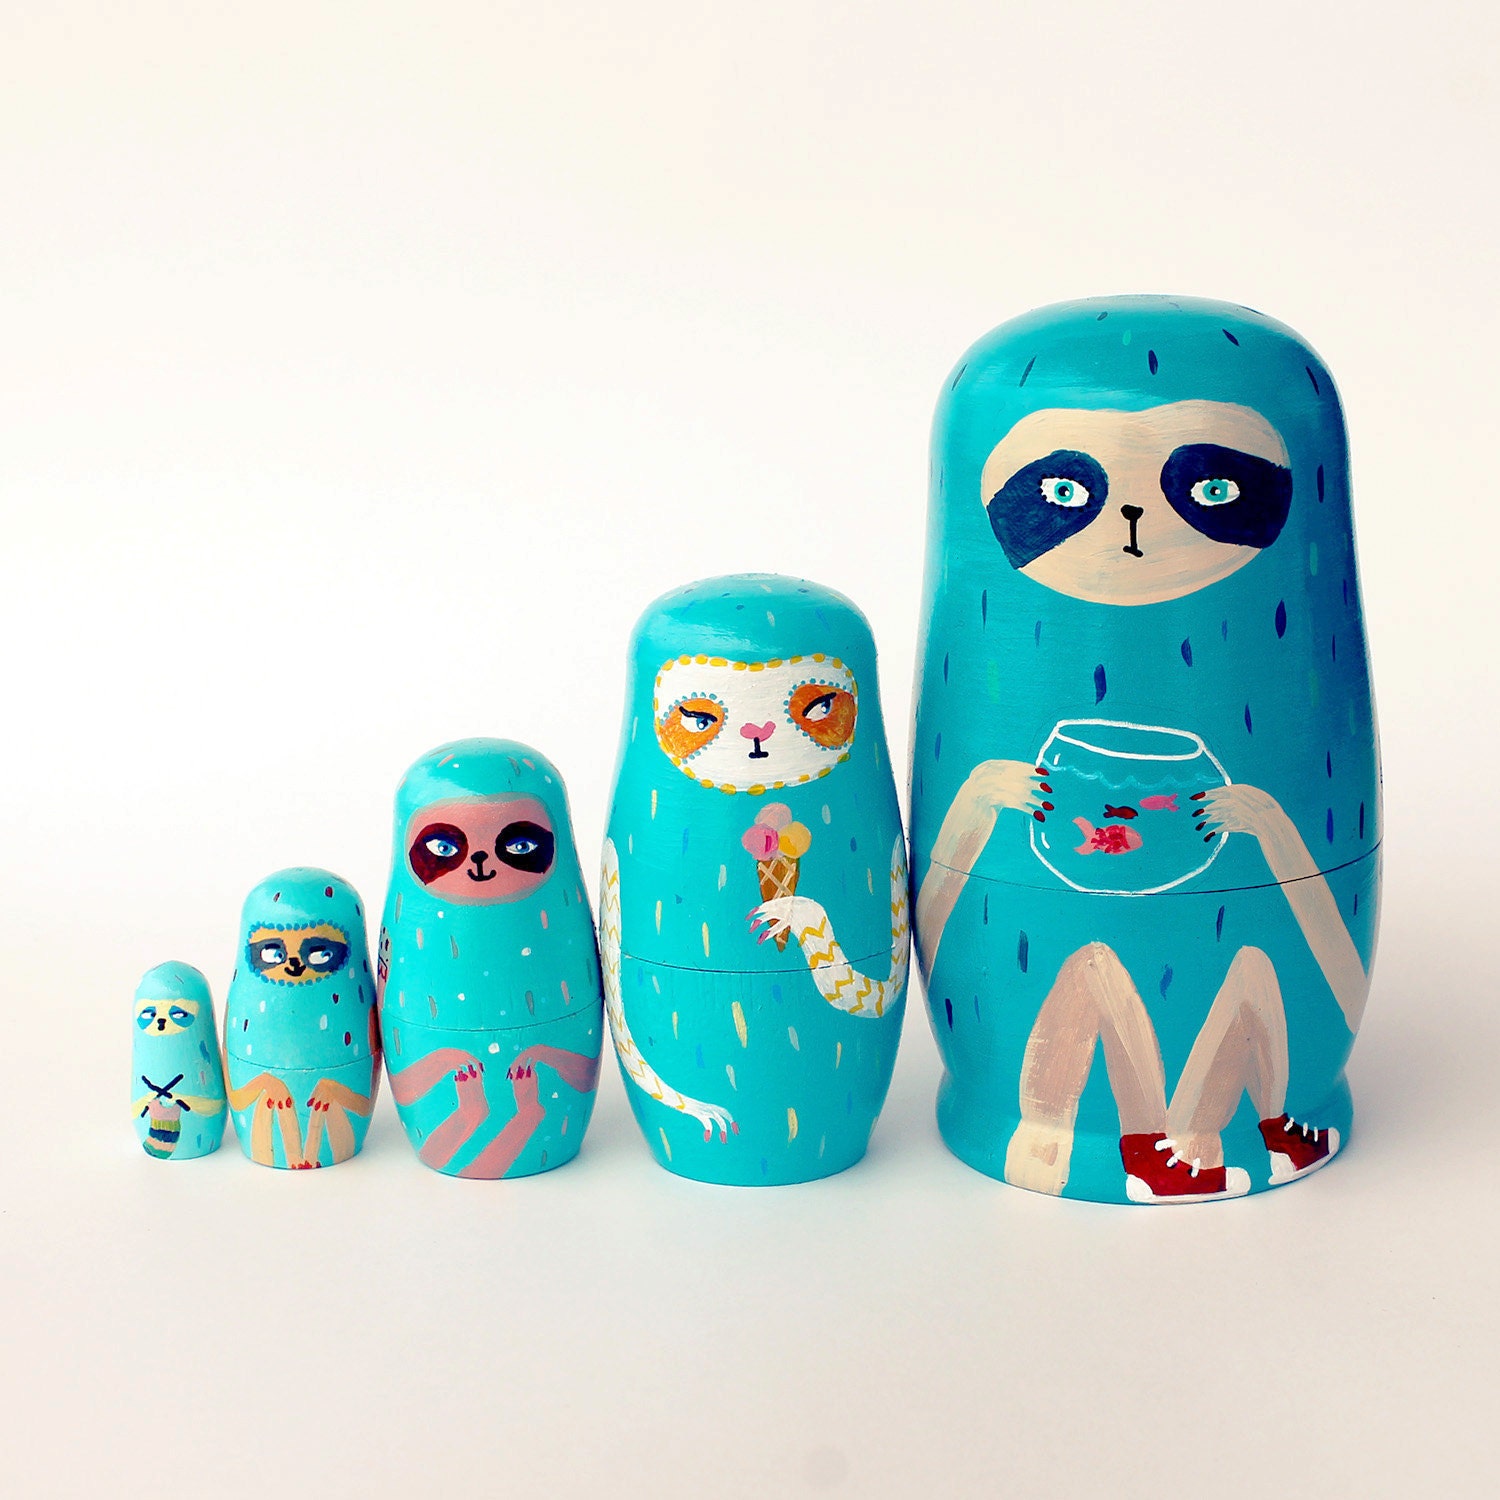 Hand painted nesting dolls - sloths - set of 5 - free shipping in Australia